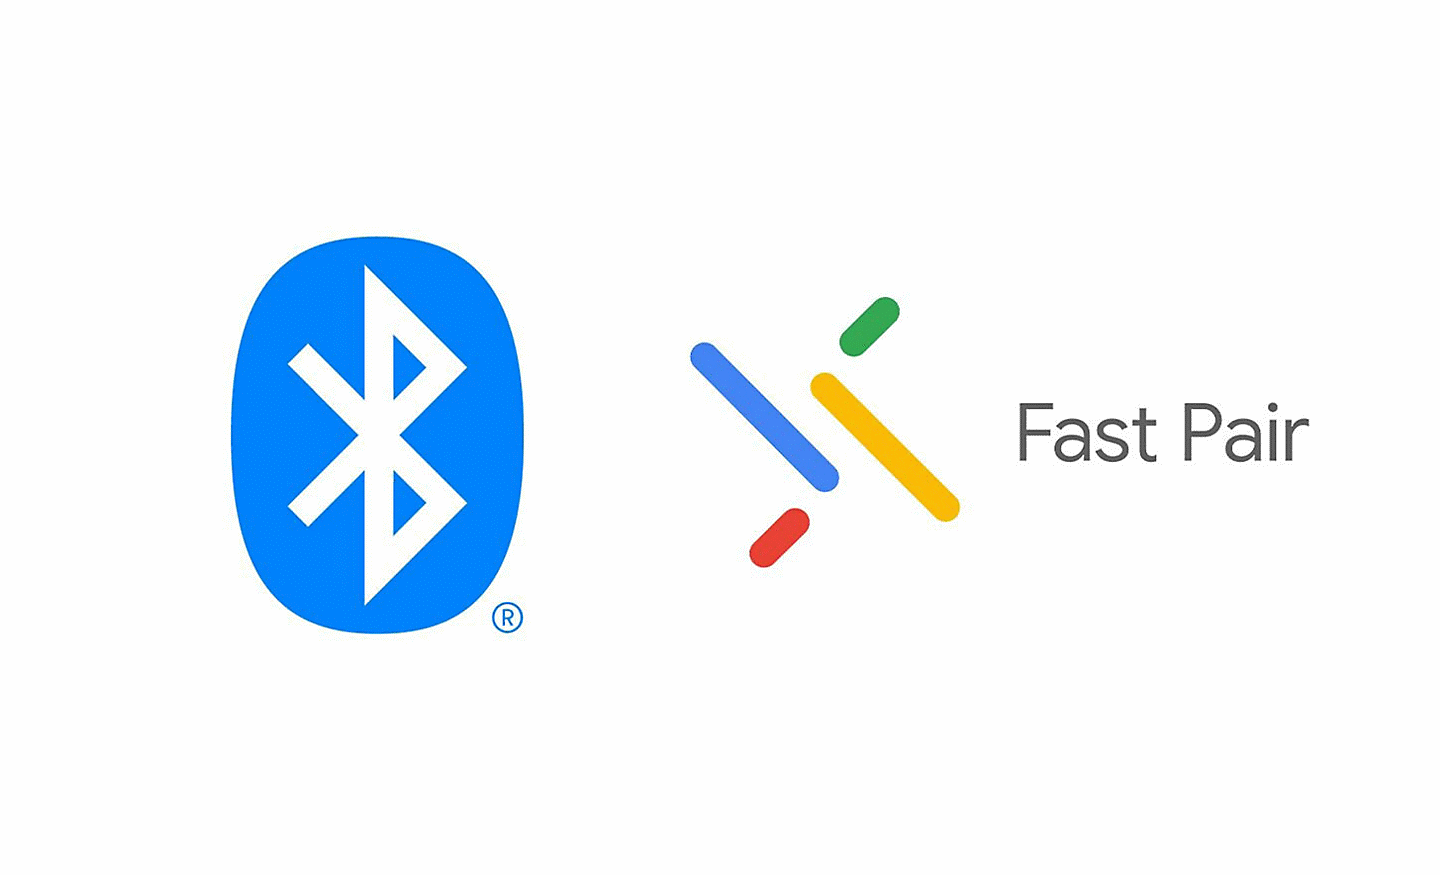 Image of the Bluetooth Fast Pair icon